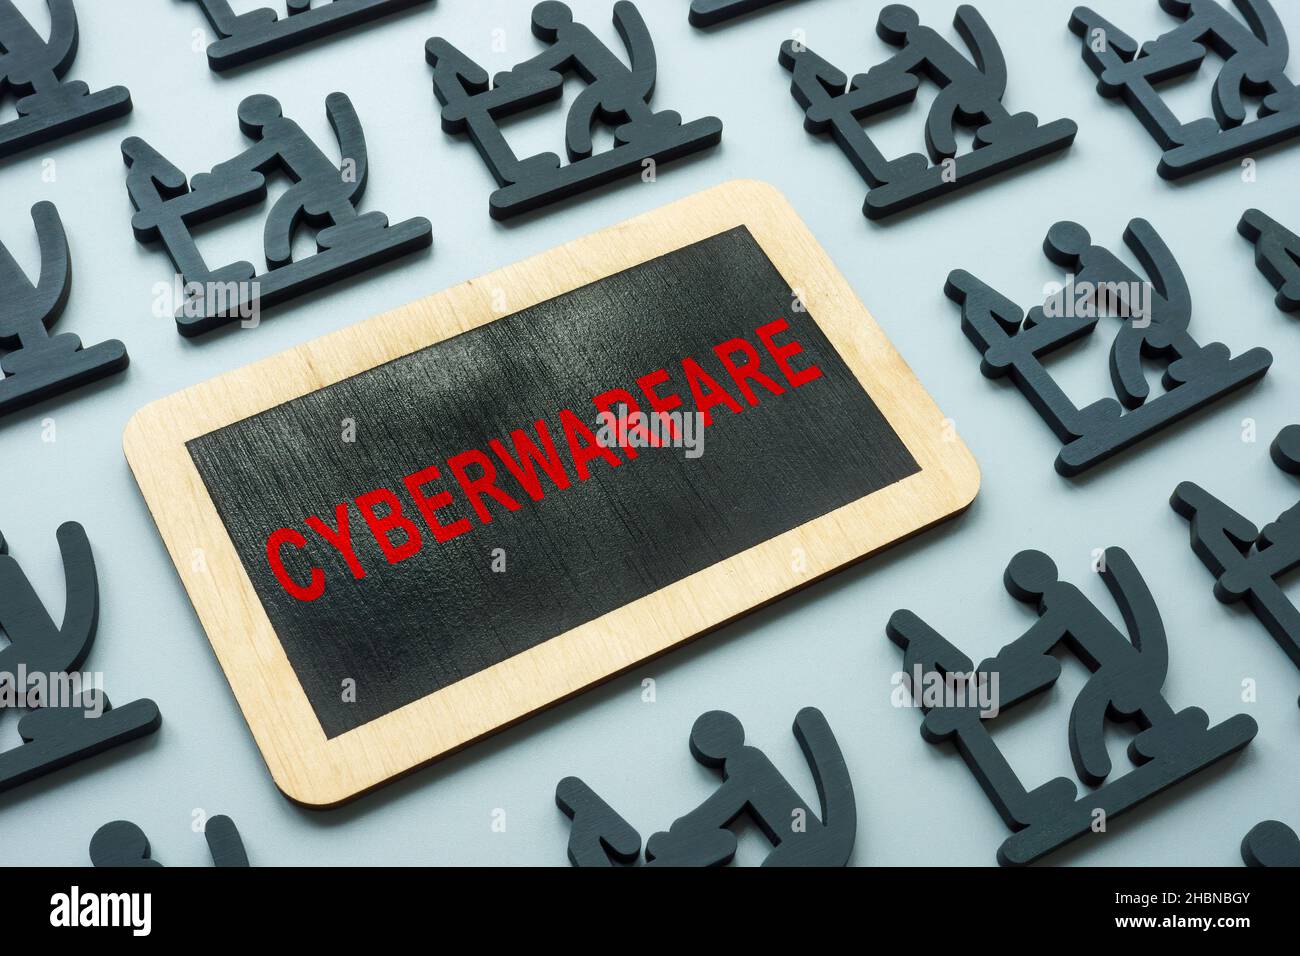 Cyberwarfare word on the plate and figures of hackers. Stock Photo